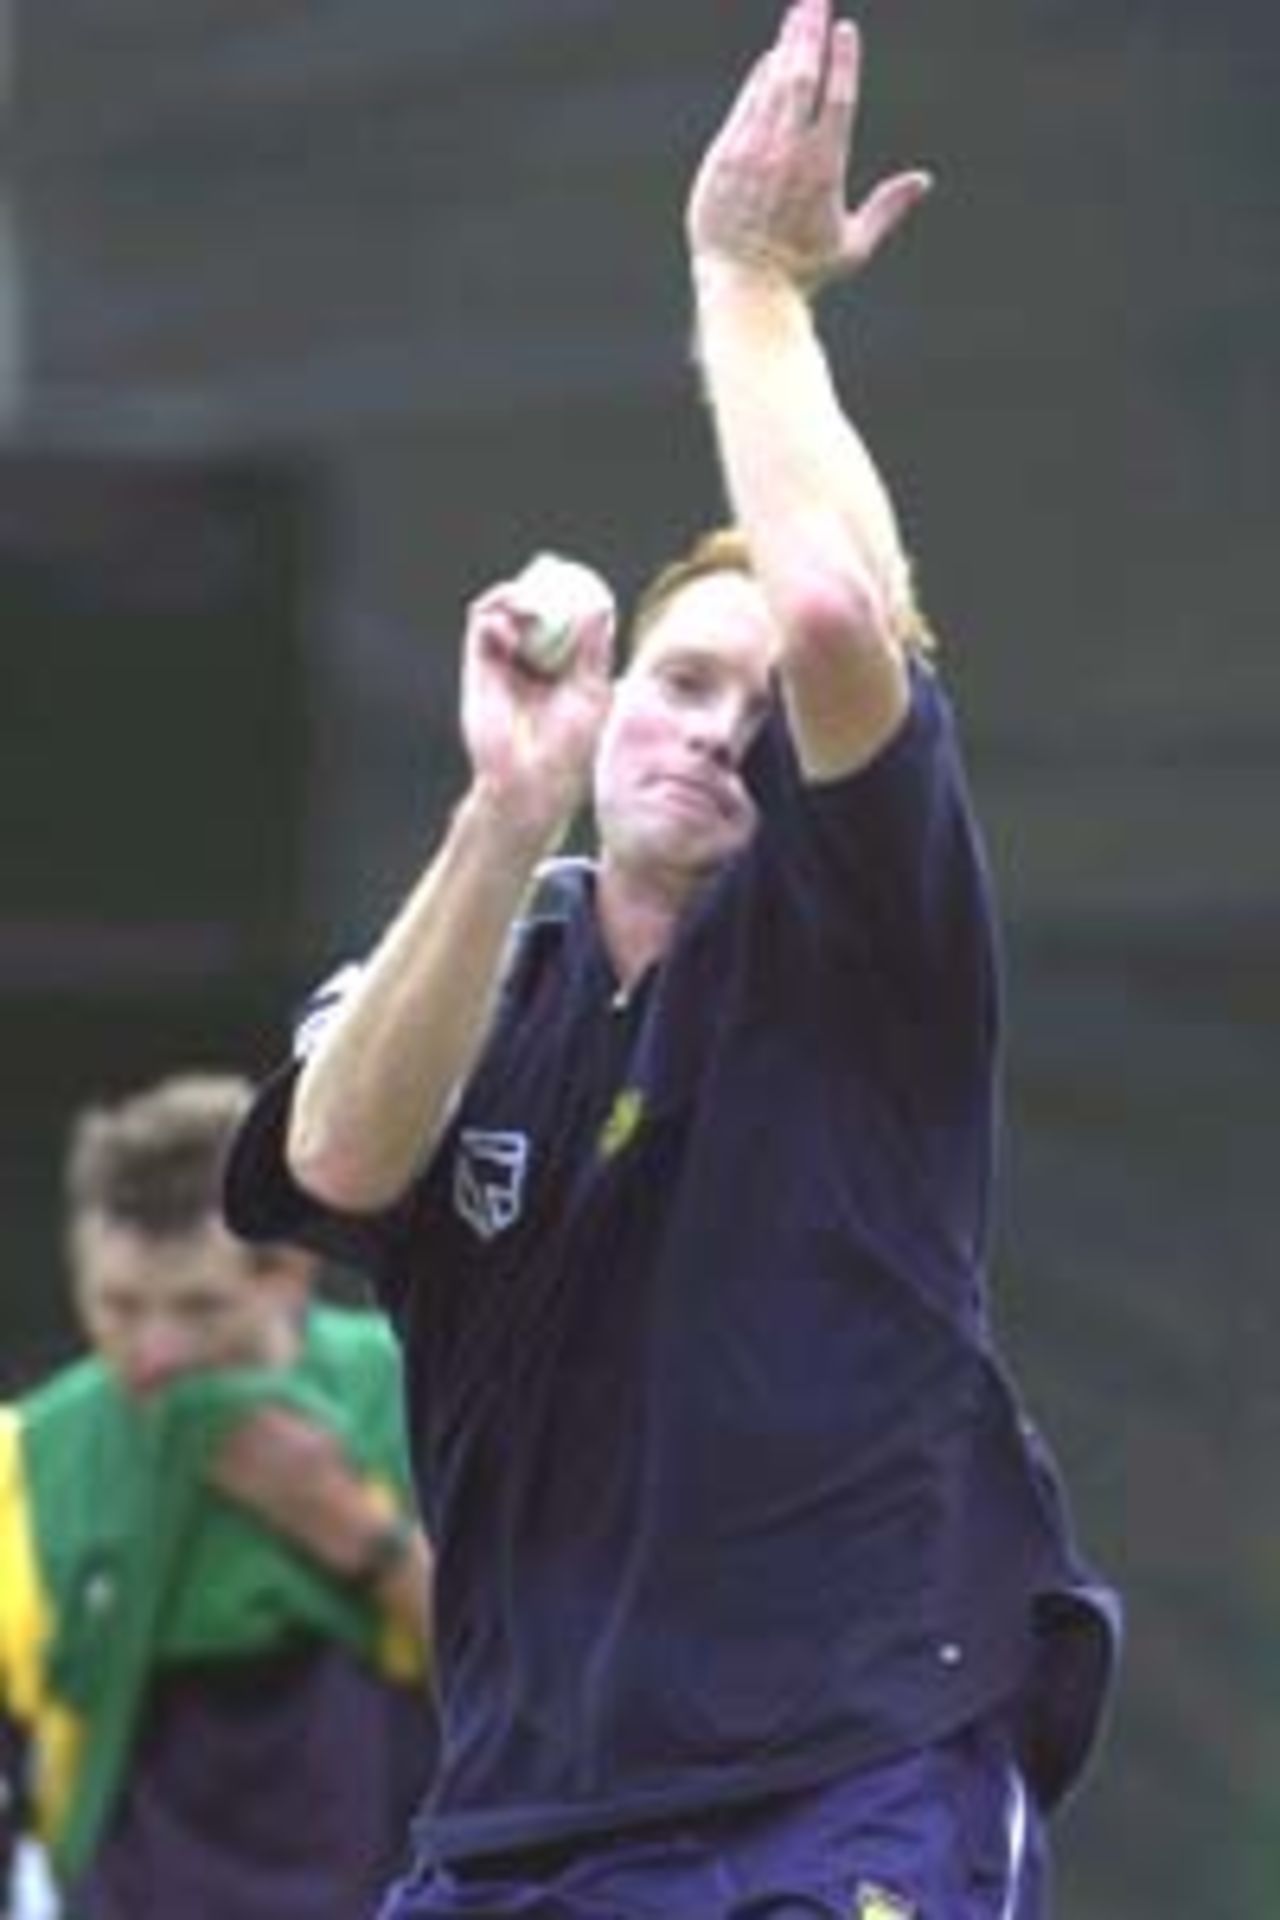 13 Aug 2000: David Terbrugge of South Africa in action during practice in the nets at Allan Border Field in Brisbane, Australia. The South African team practicing in Brisbane to prepare for the Super Challenge 2000 against Australia.